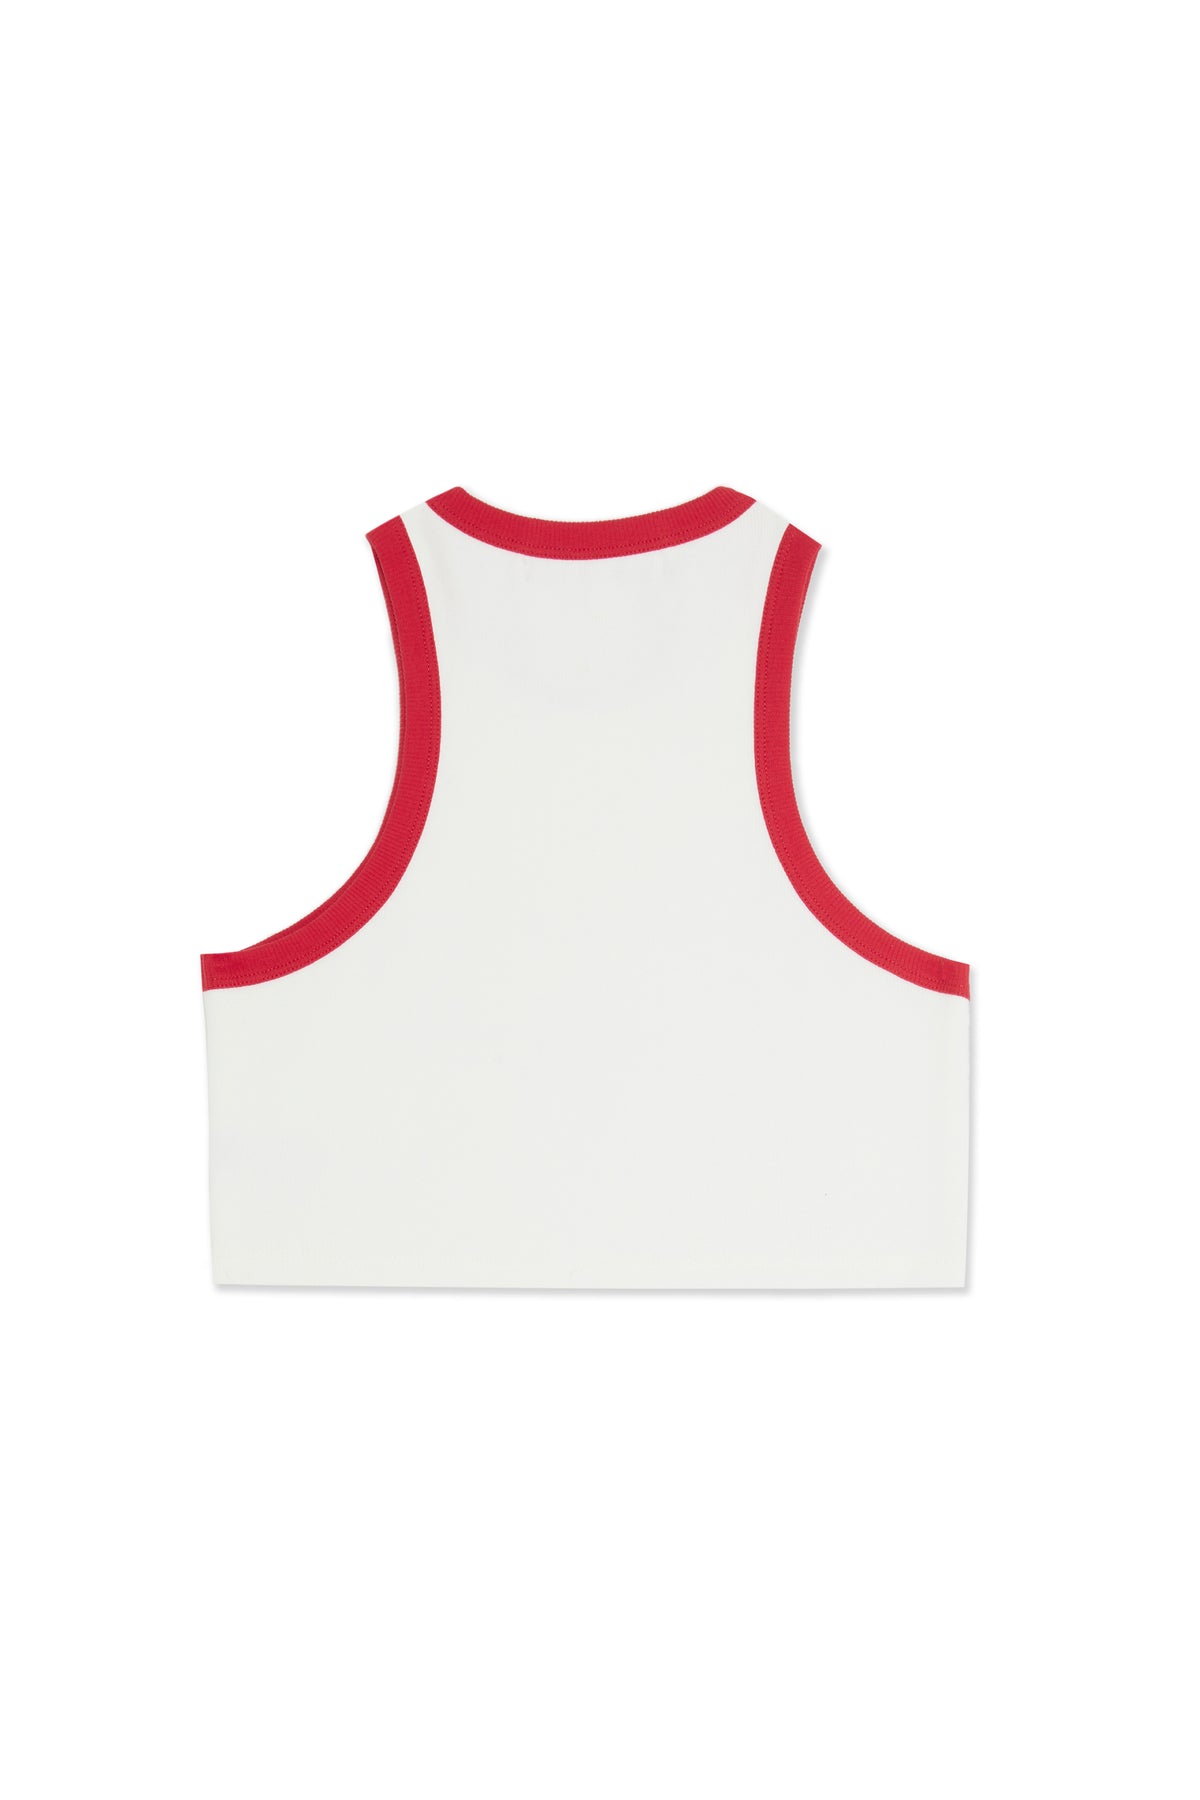 Dibby Tank in Peppermint Dibby Graphic